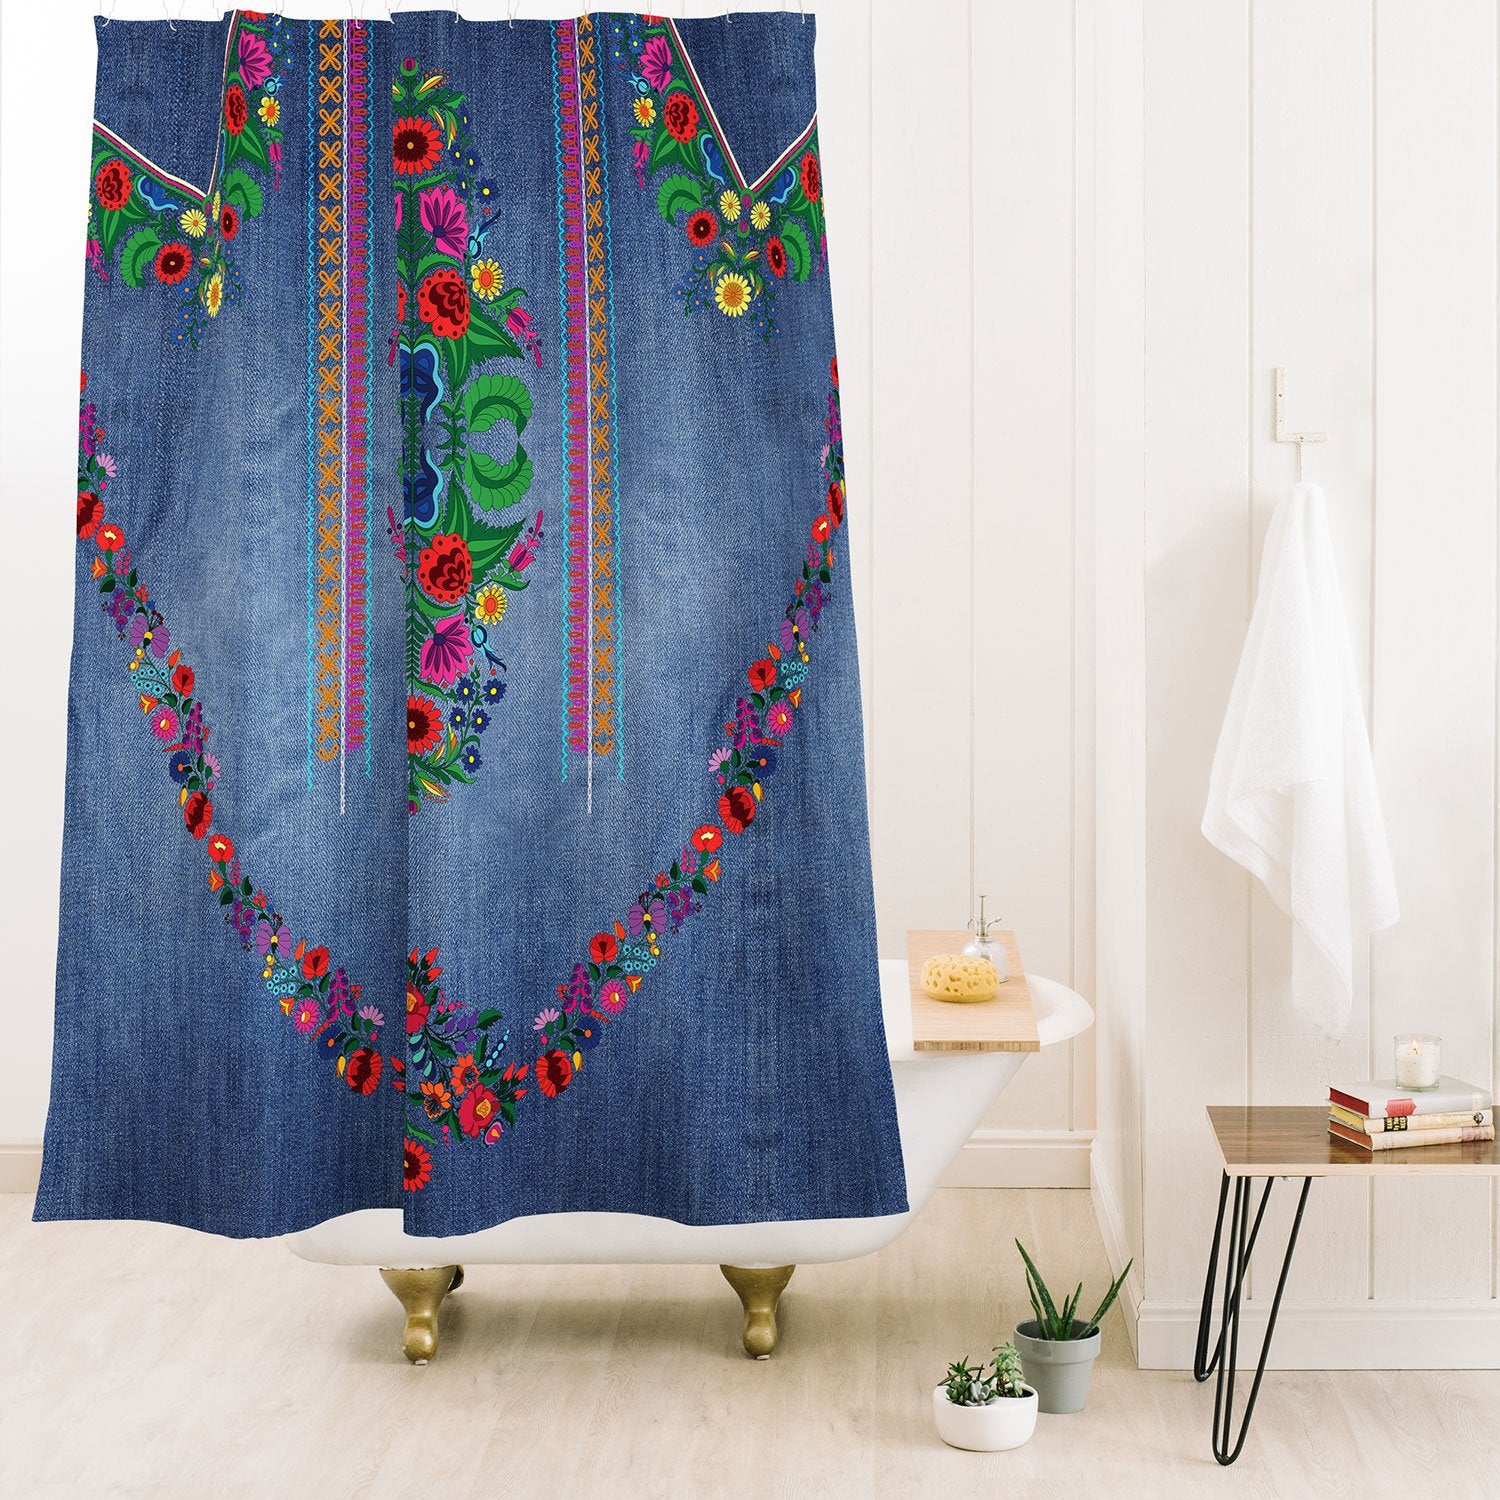 Bohemian Denim Look Shower Curtain - bathroom, bathroom decor, bohemian, bohemian design, boho print, boho style, boho.gypsy, bohowestern, curtain, decor, denim, embroidery, home, rodeo, shower, shower curtains, shower curtians, western, western decor, western home decor, westerndecor, westernhomedecor, westernshowercurtain - denim2 - Baha Ranch Western Wear